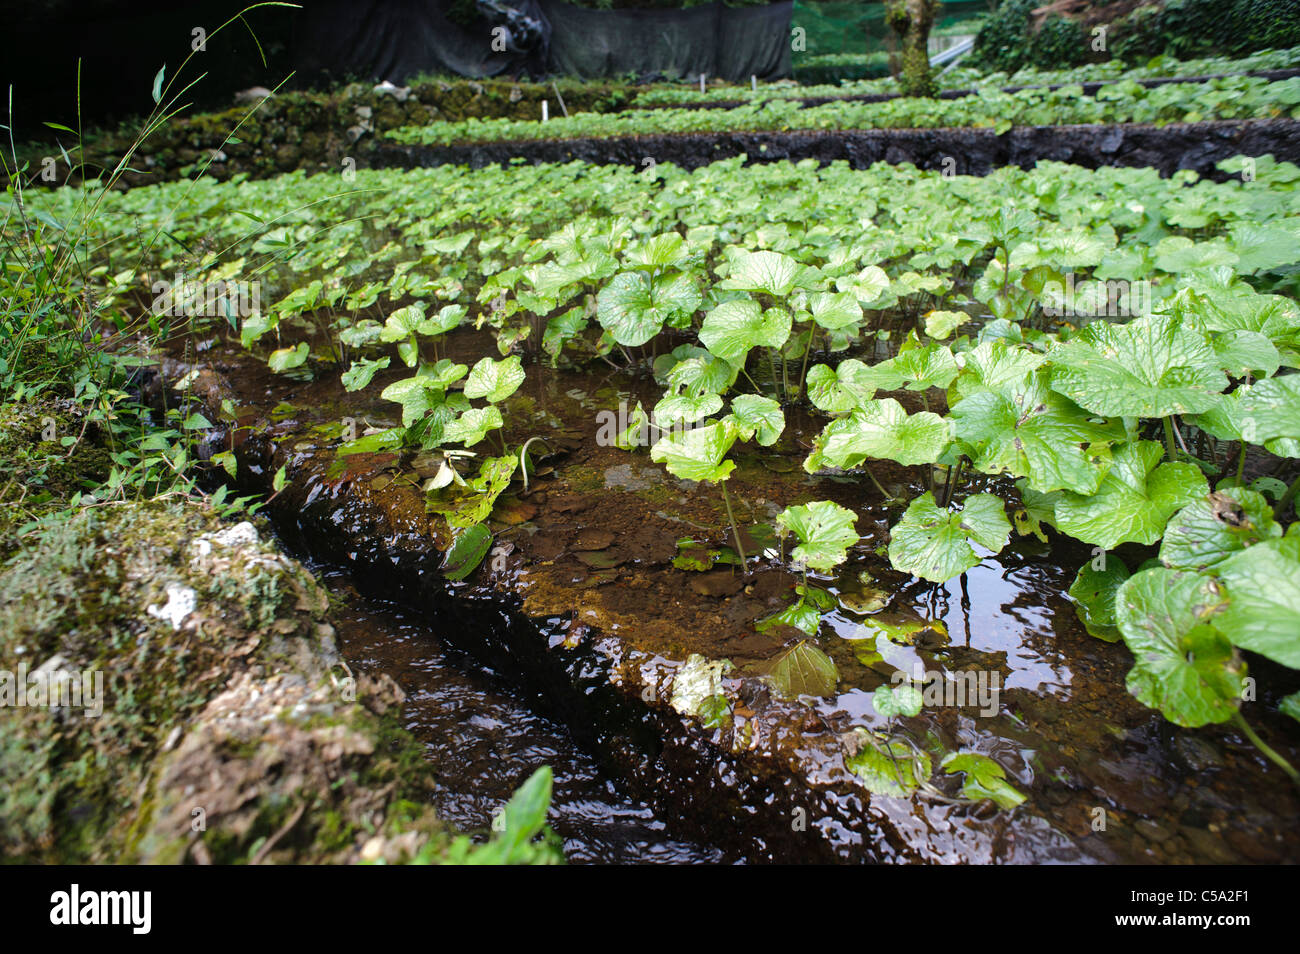 Wasabi growing in flowing water. Wasabi needs the cleanest of environments in which to grow. Stock Photo